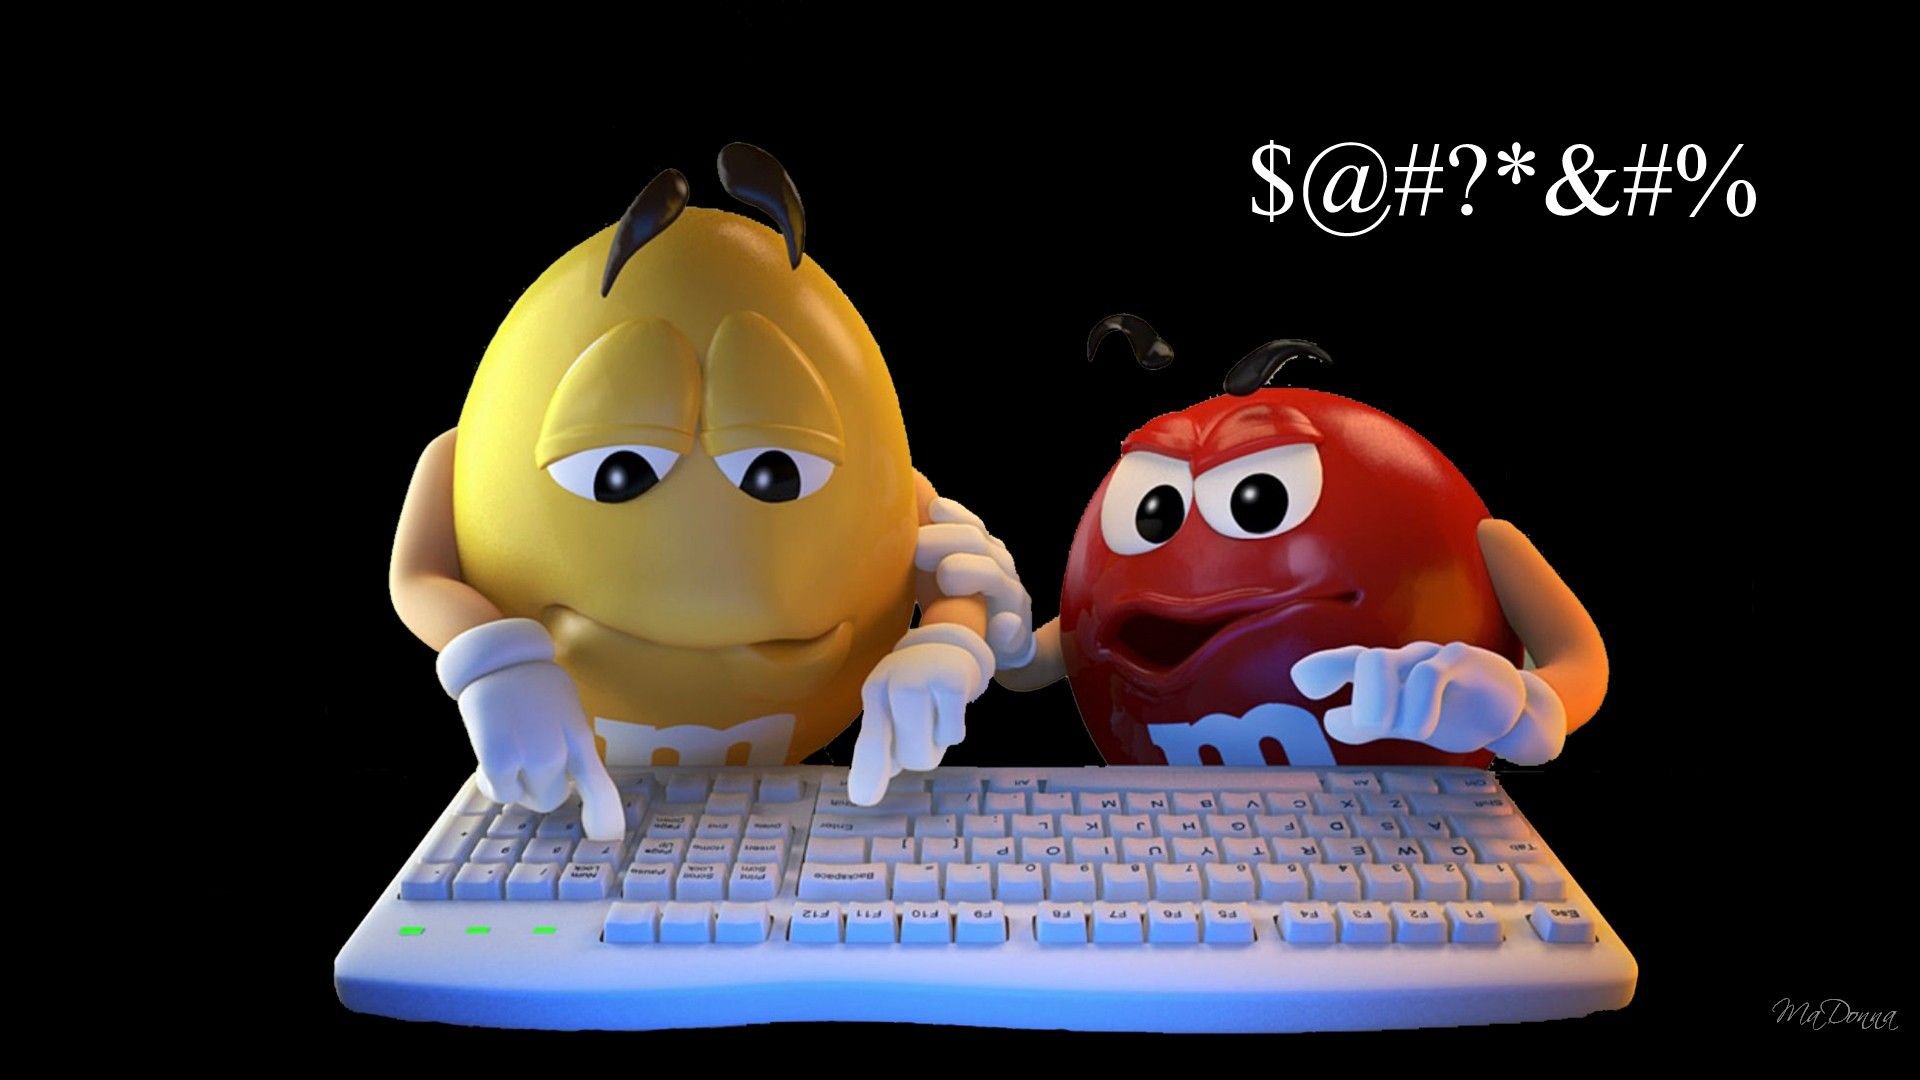 Free download Keyboard Frustration computer cursing cussing Firefox Persona [1920x1080] for your Desktop, Mobile & Tablet. Explore M&M Free Wallpaper. M&M Candy Wallpaper Border, M&M Wallpaper Border, M&M Wallpaper